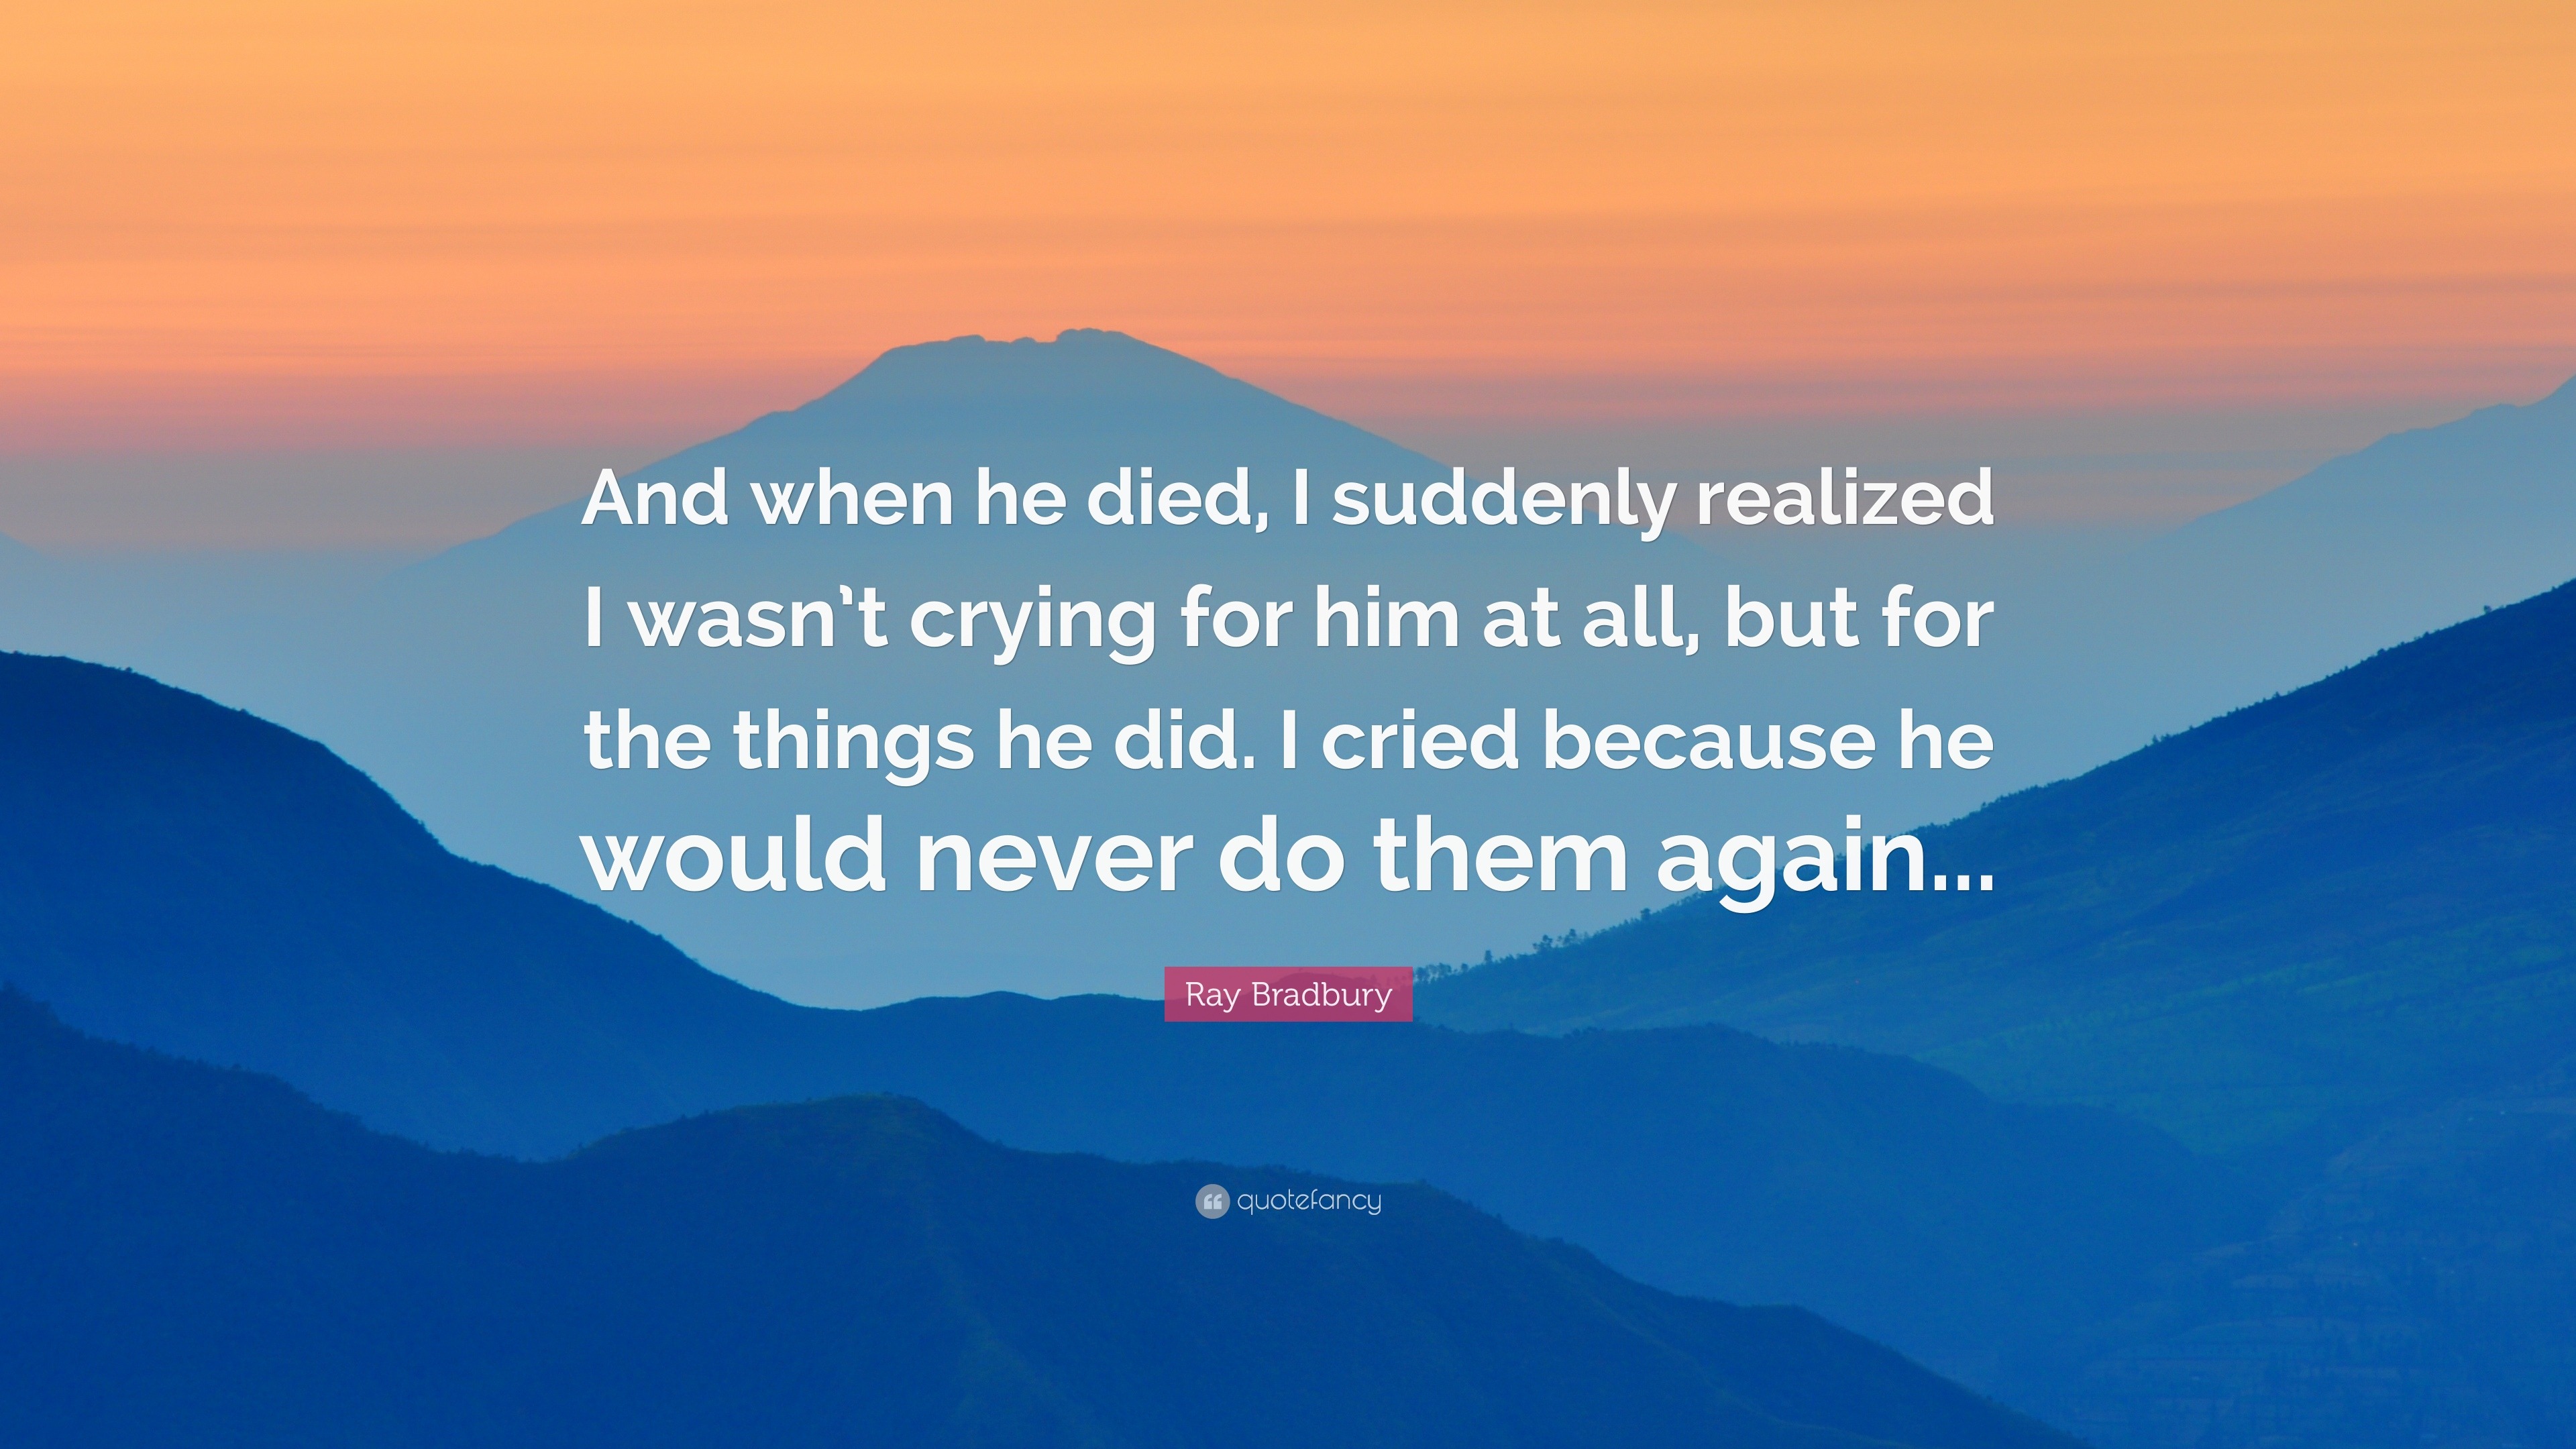 Ray Bradbury Quote: “And when he died, I suddenly realized I wasn’t ...